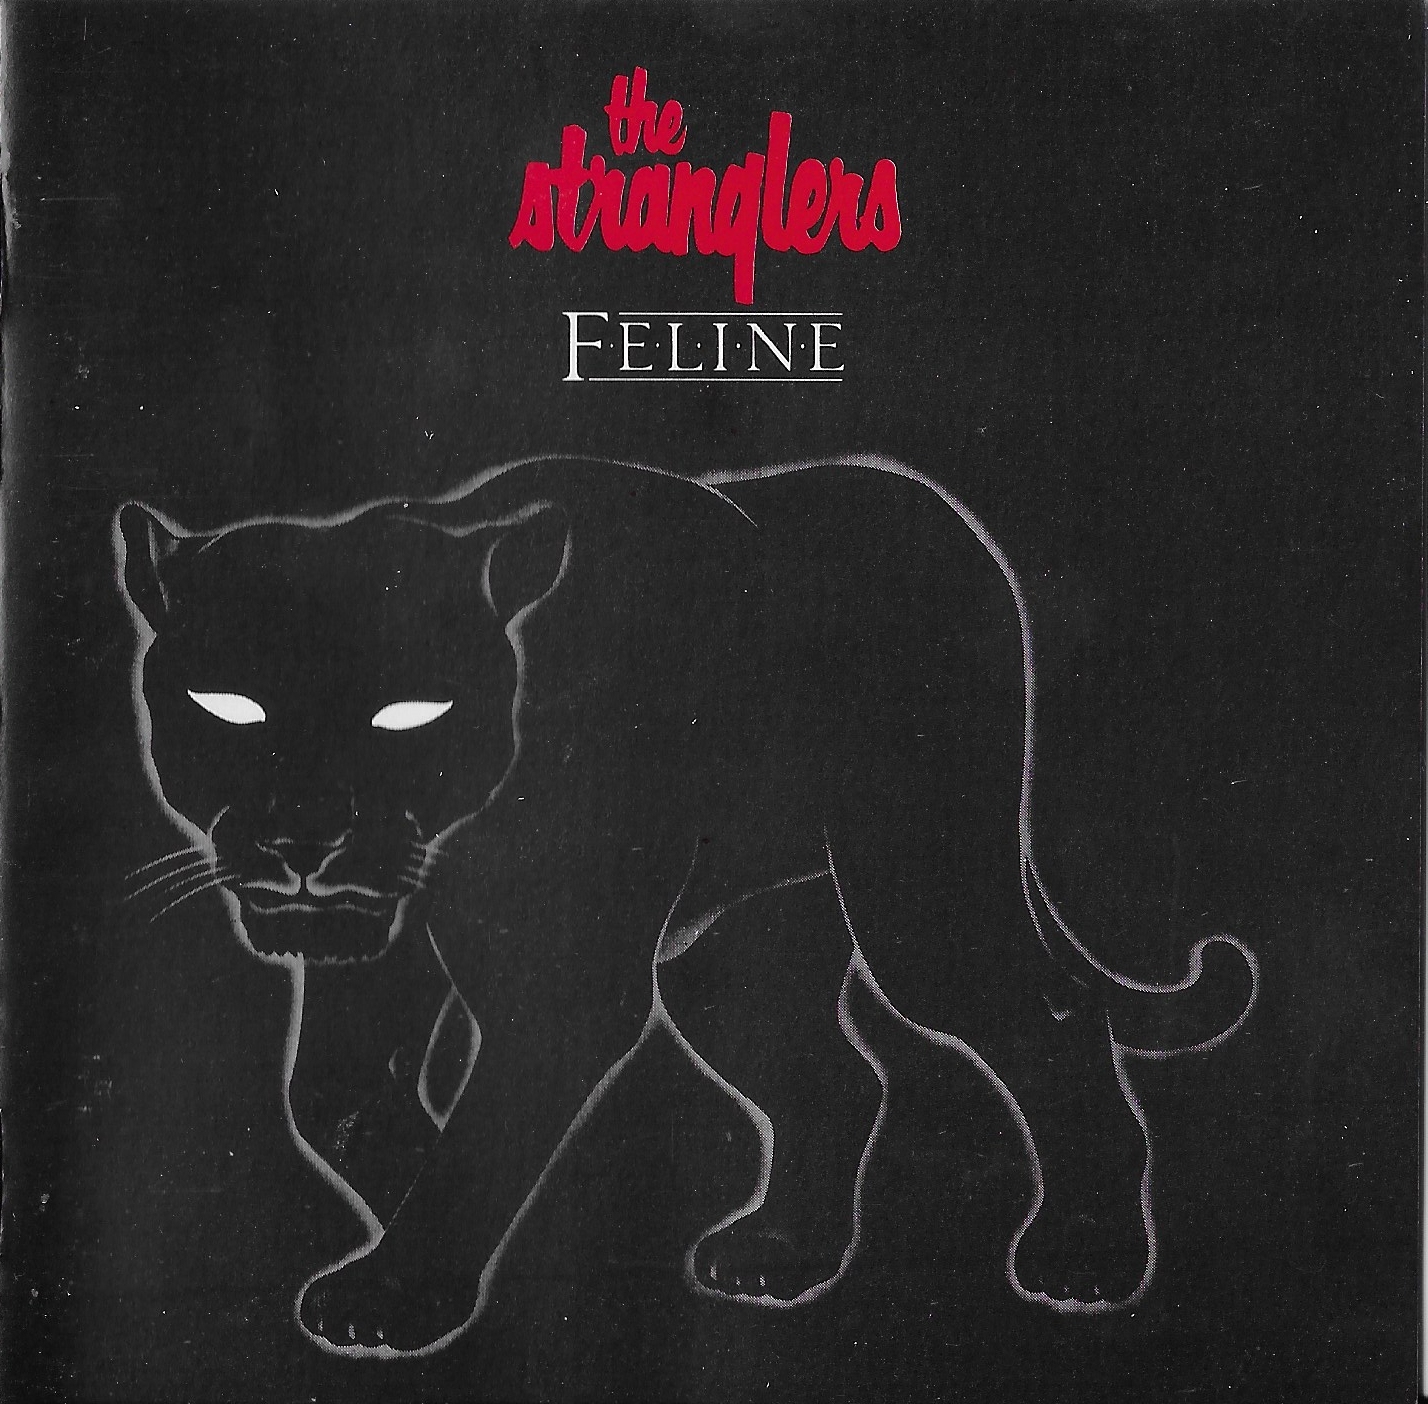 Picture of Feline by artist The Stranglers from The Stranglers cds